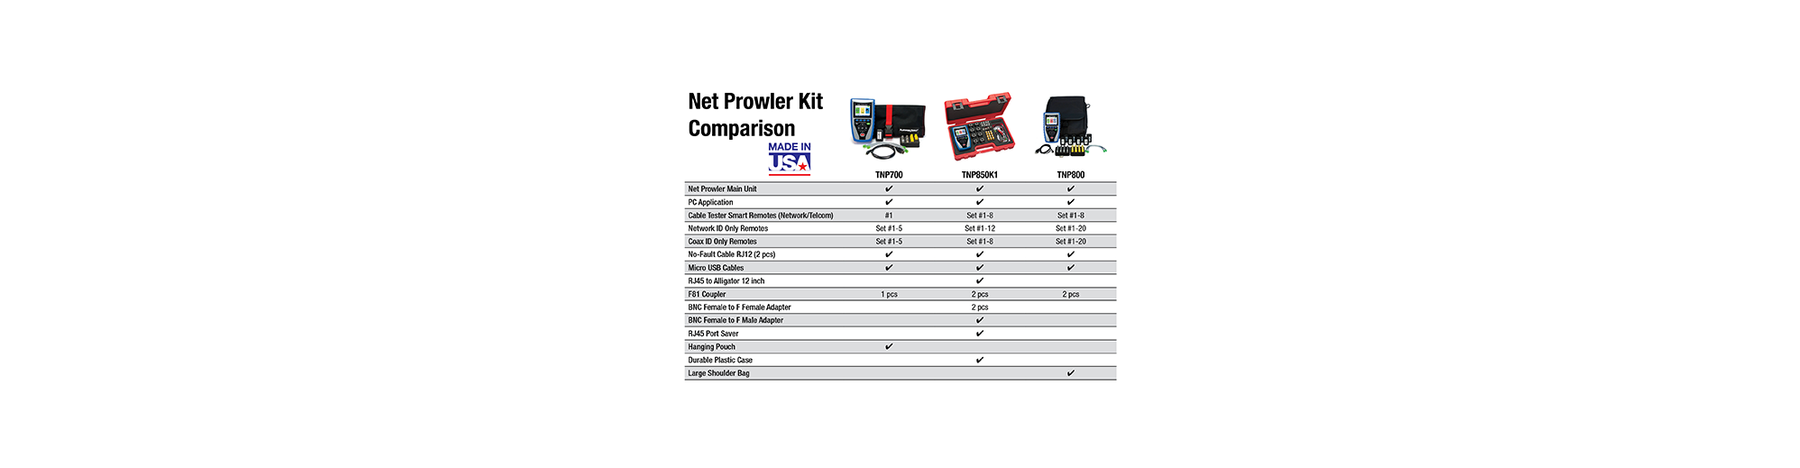 Tool Tuesday - Platinum Tools Net Prowler and Pro Test Kit